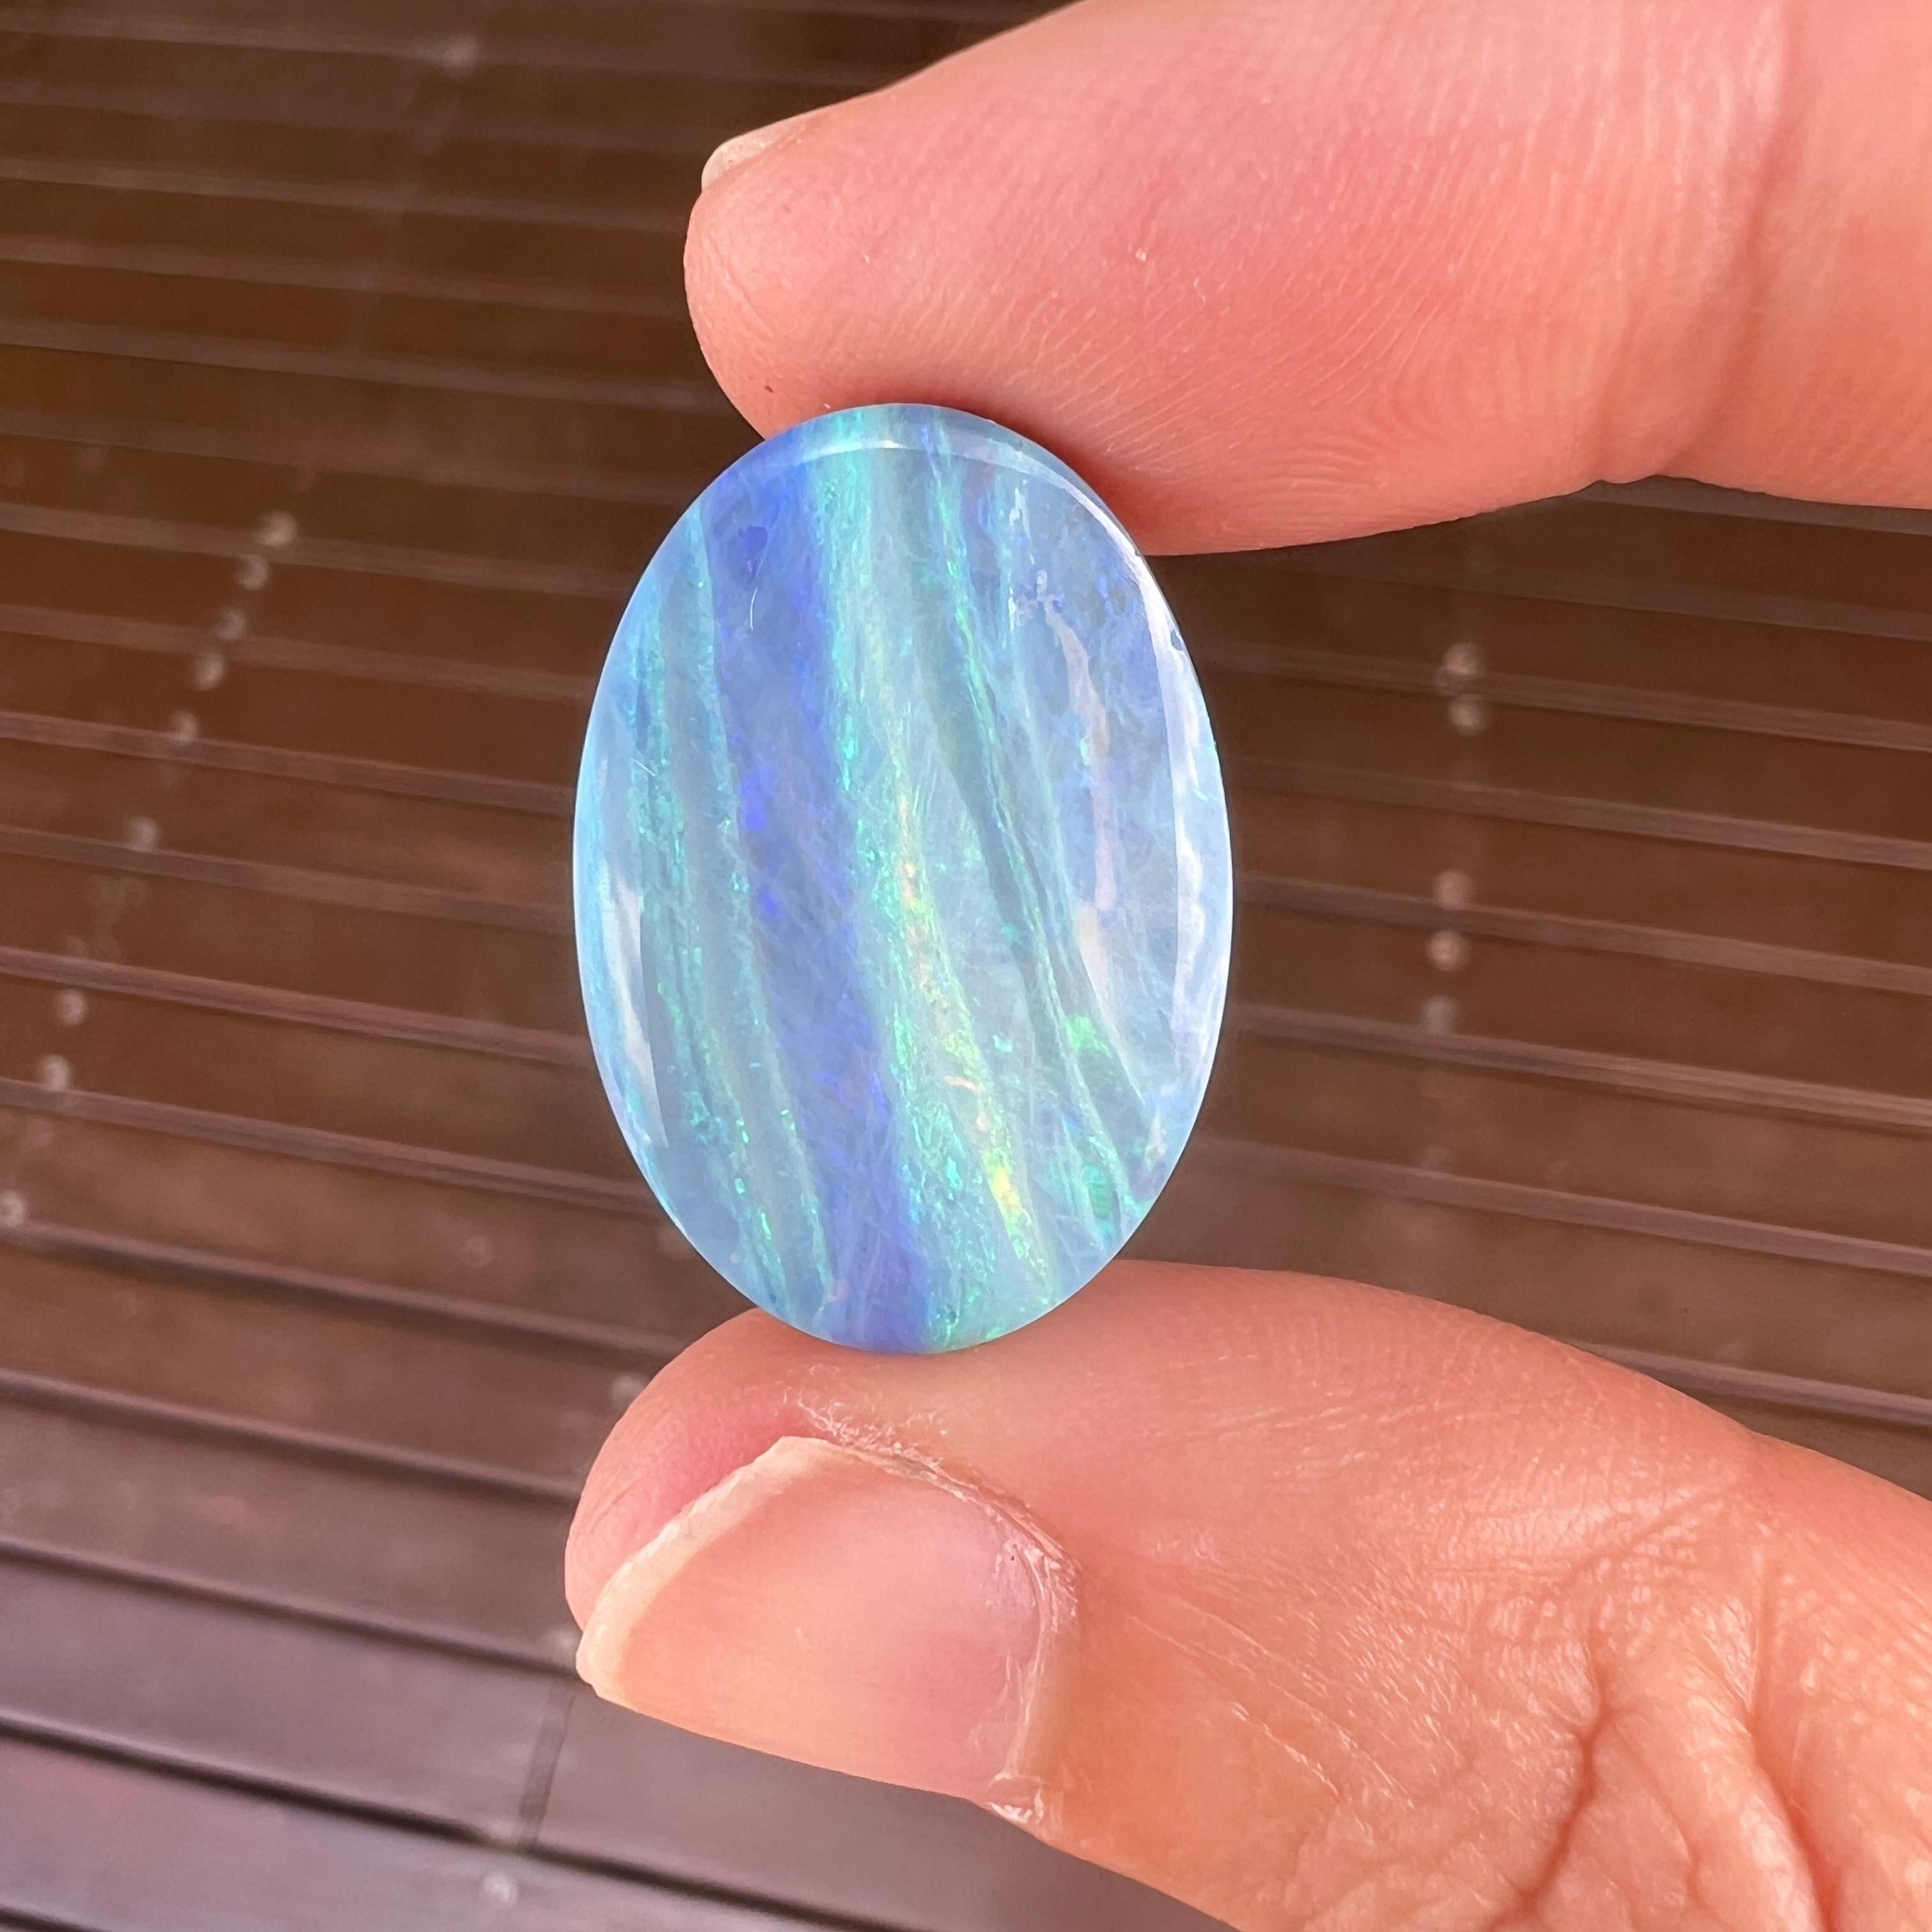 This amazing 17.99 Ct Australian boulder opal was mined by Sue Cooper at her Mt. Margaret opal mine in western Queensland, Australia in 2022. Sue processed the rough opal herself and cut into into an large oval shape. We especially love the ocean